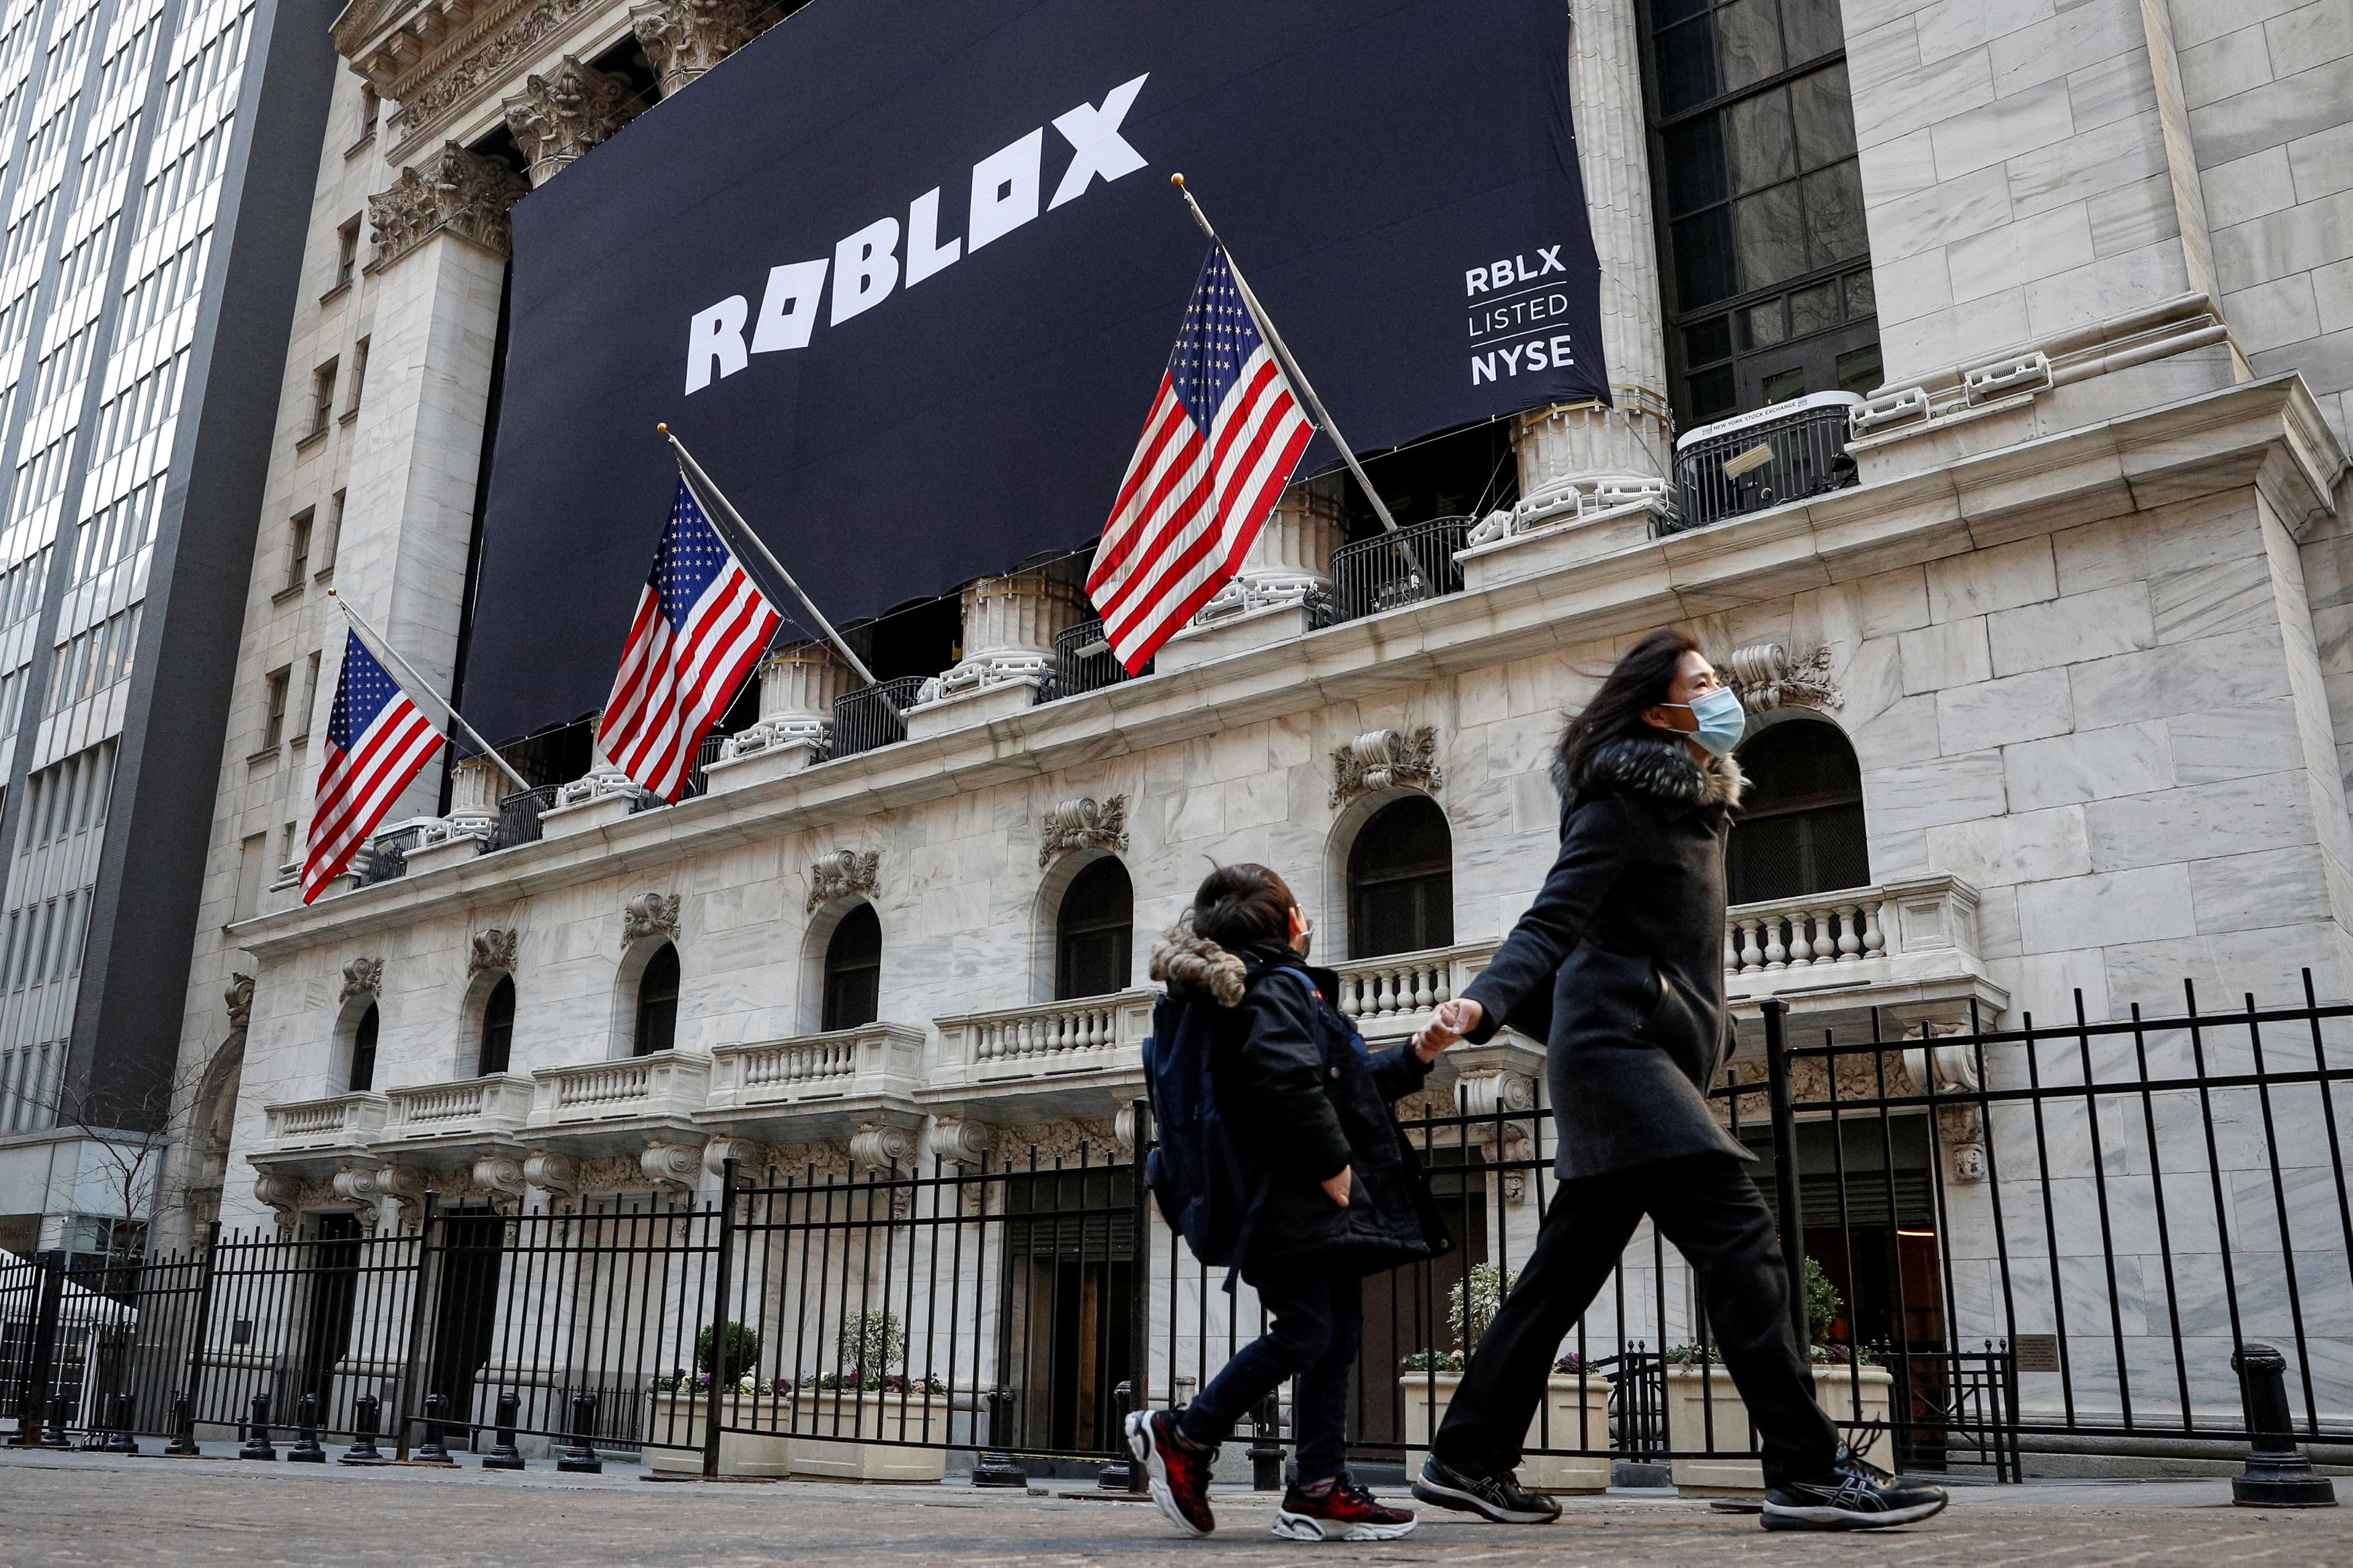 Roblox shares fall 12% after the company’s March update